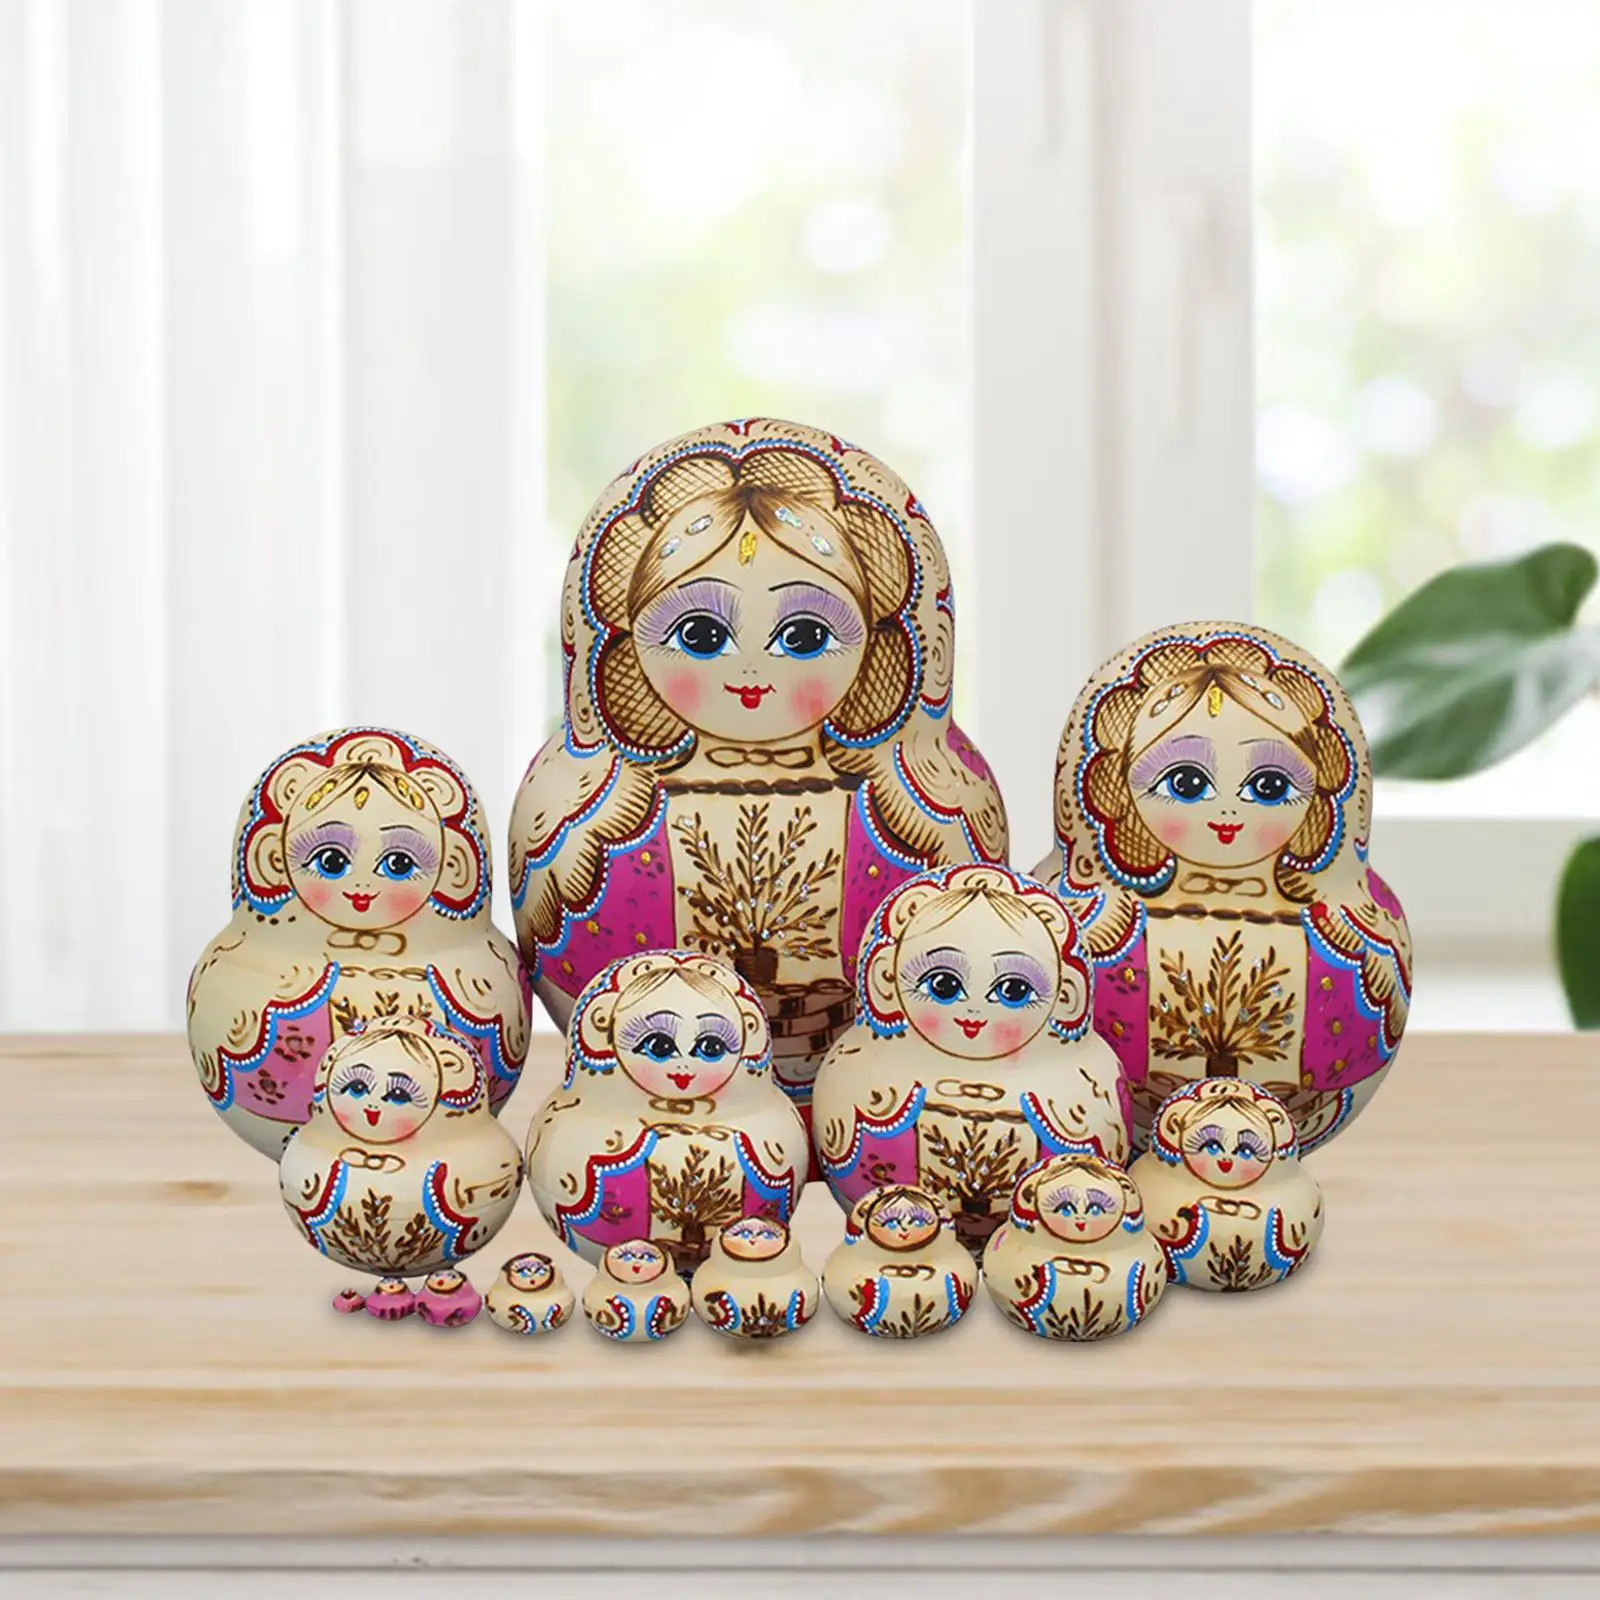 15Pcs Handmade Nesting Doll Stacking Ornament Figures Collectible Crafts Wooden Matryoshka Dolls for Home